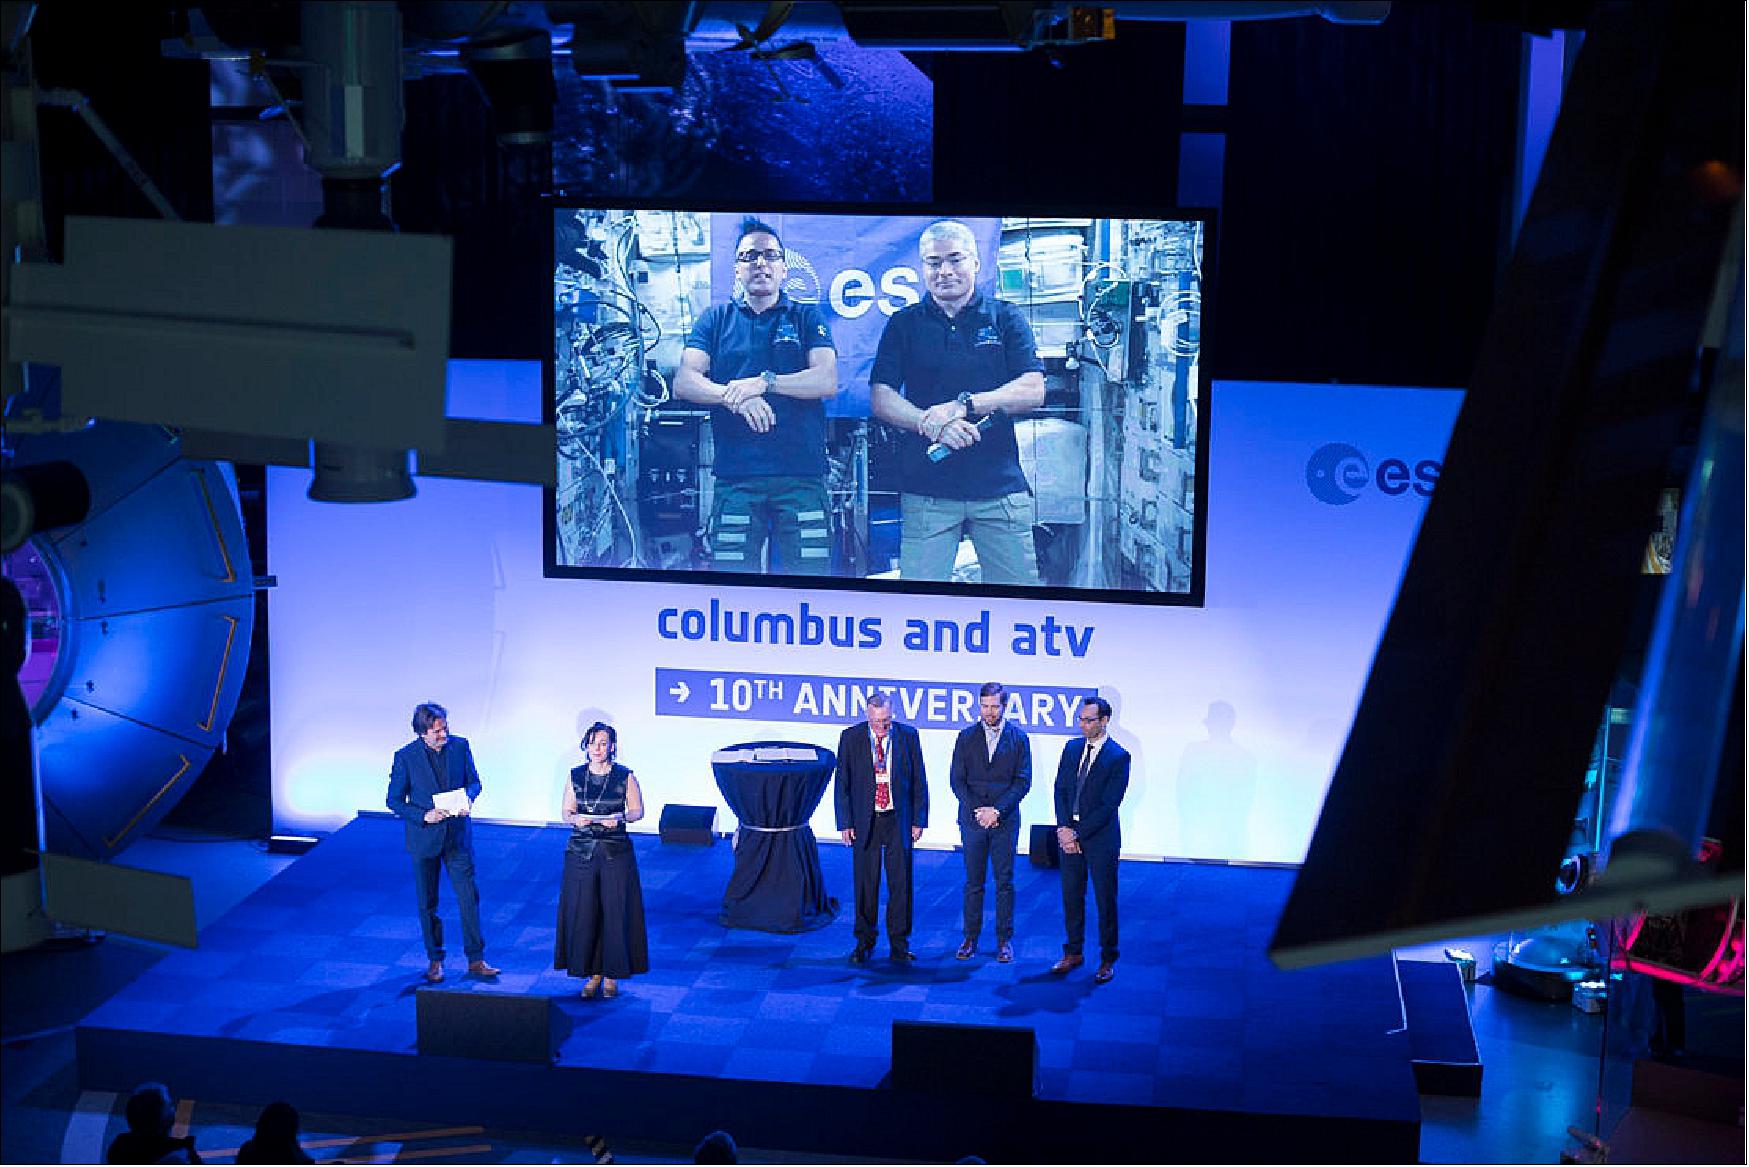 Figure 21: The larger Columbus family of planners, builders, scientists, support teams and astronauts gathered in ESTEC, the Netherlands on February 7 2018 to celebrate the past, present and future of Europe's major contributions to the Station (image credit: ESA)